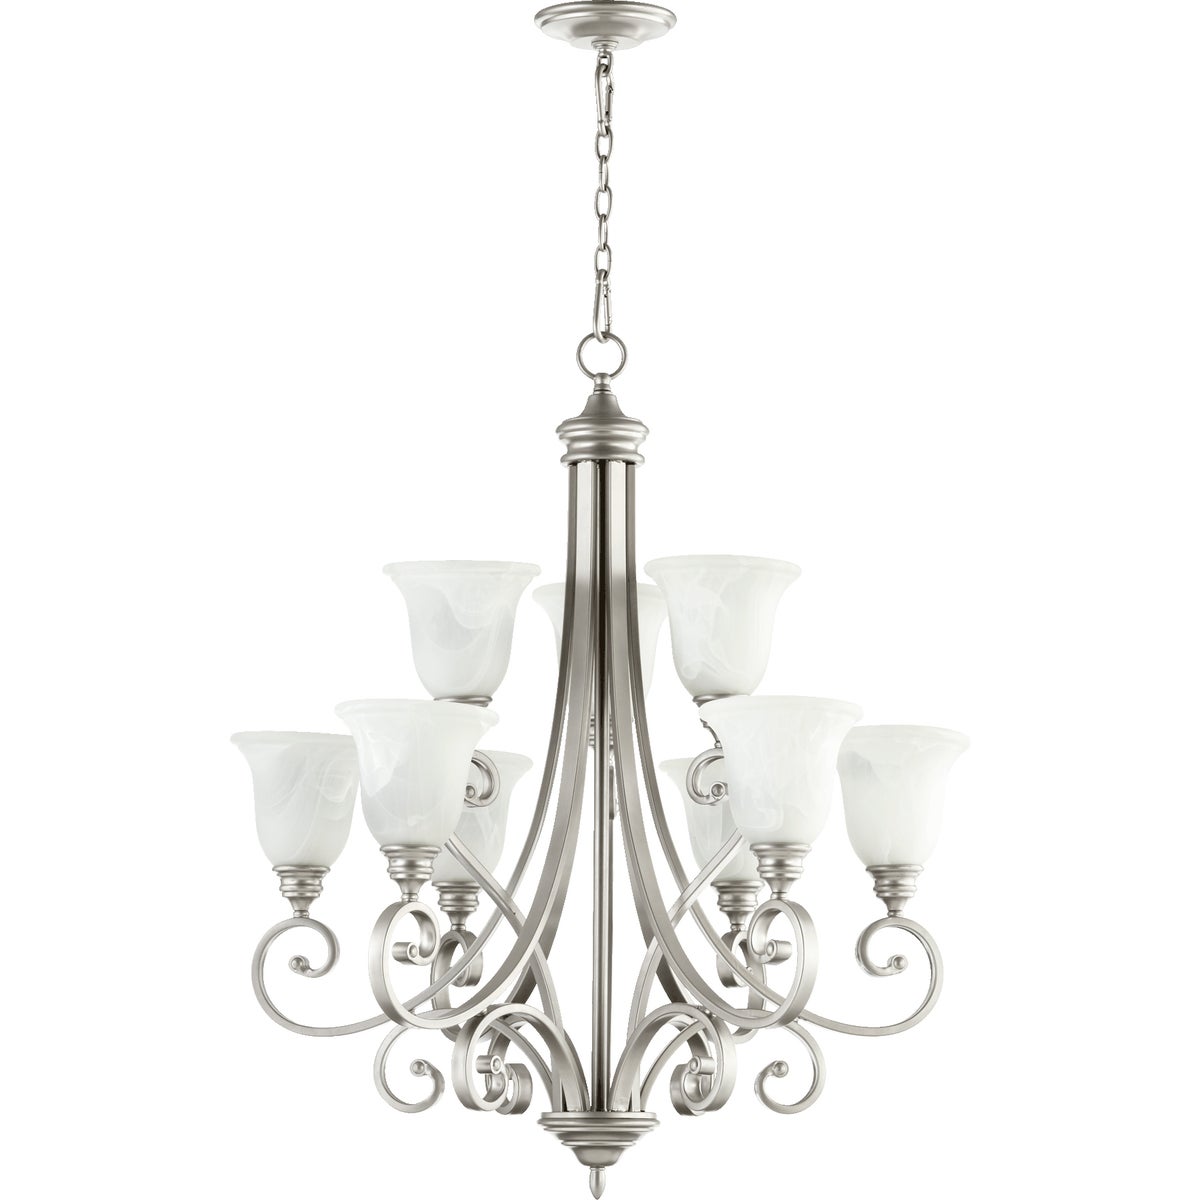 Foyer Chandelier with White Glass Shades, Curvaceous Arms, and Symmetrical Balance. Celebrate timeless lighting design with this luxury Quorum International fixture. Perfect for traditional and transitional spaces. 31"W x 36.25"H. 2-Year Warranty. UL Listed for Dry Locations. 9 Medium E26 Bulbs (60W, not included). Dimmable.